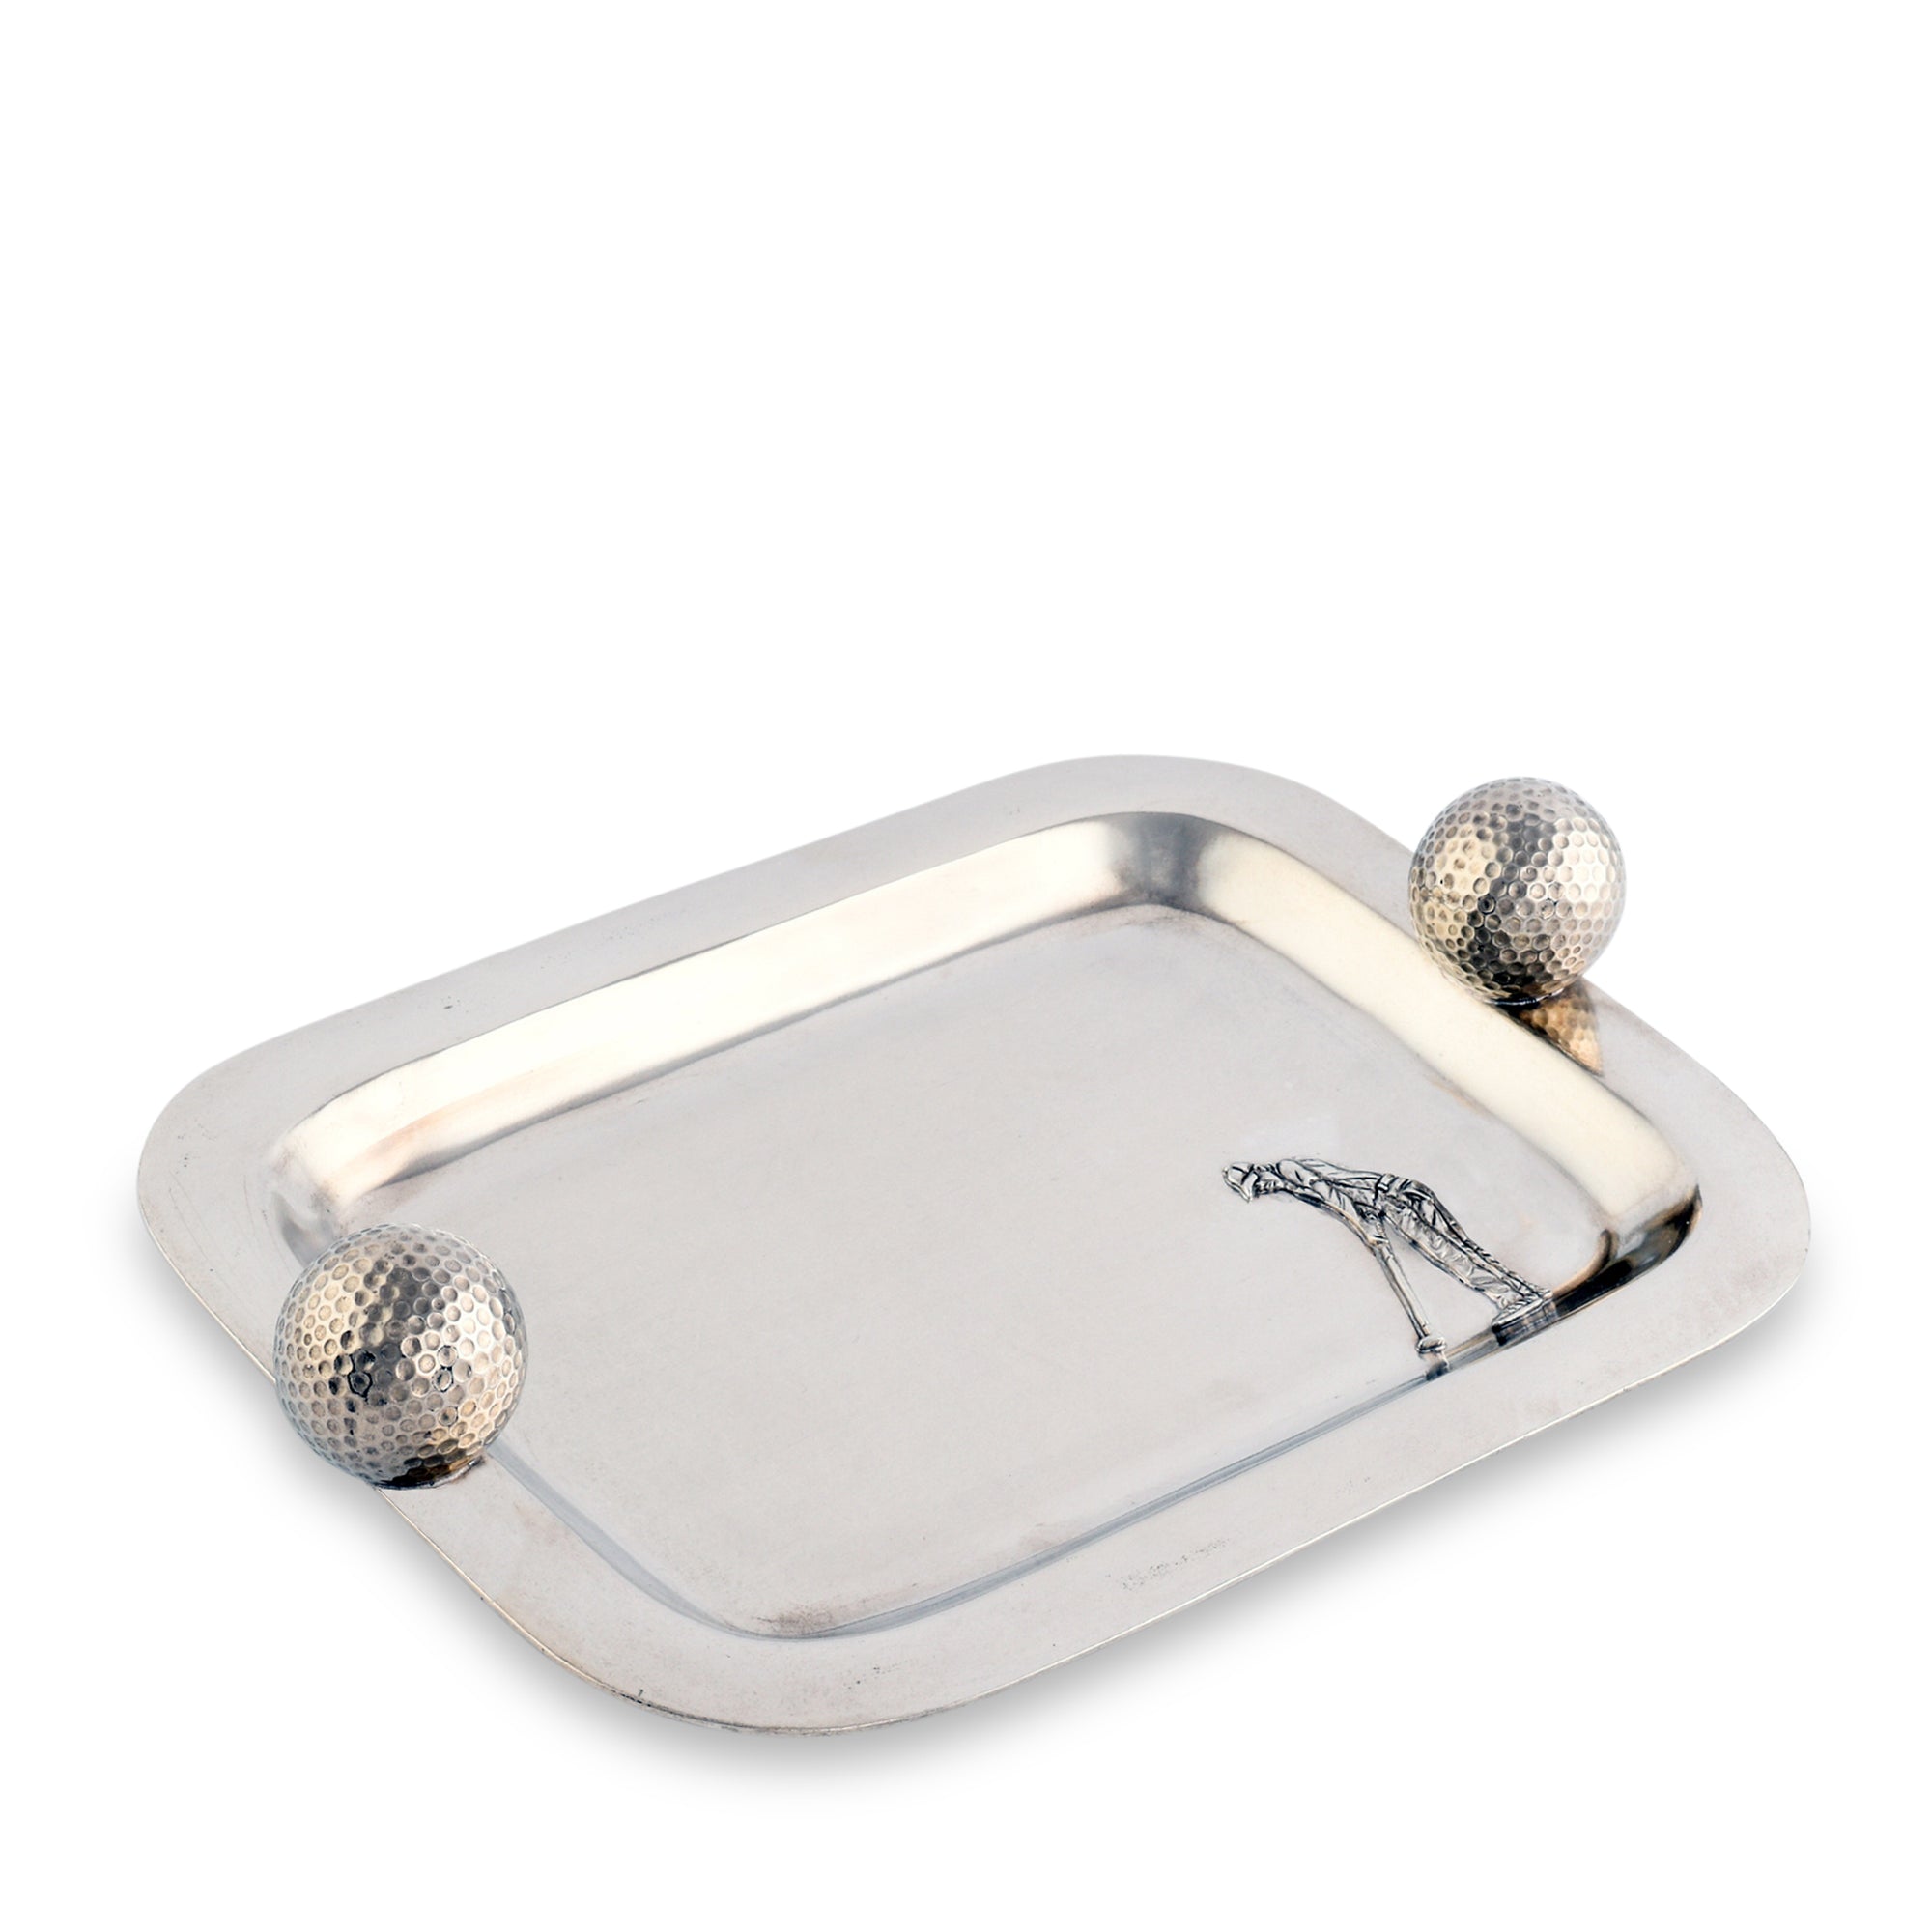 Vagabond House Pewter Catchall Tray Golf Balls Product Image